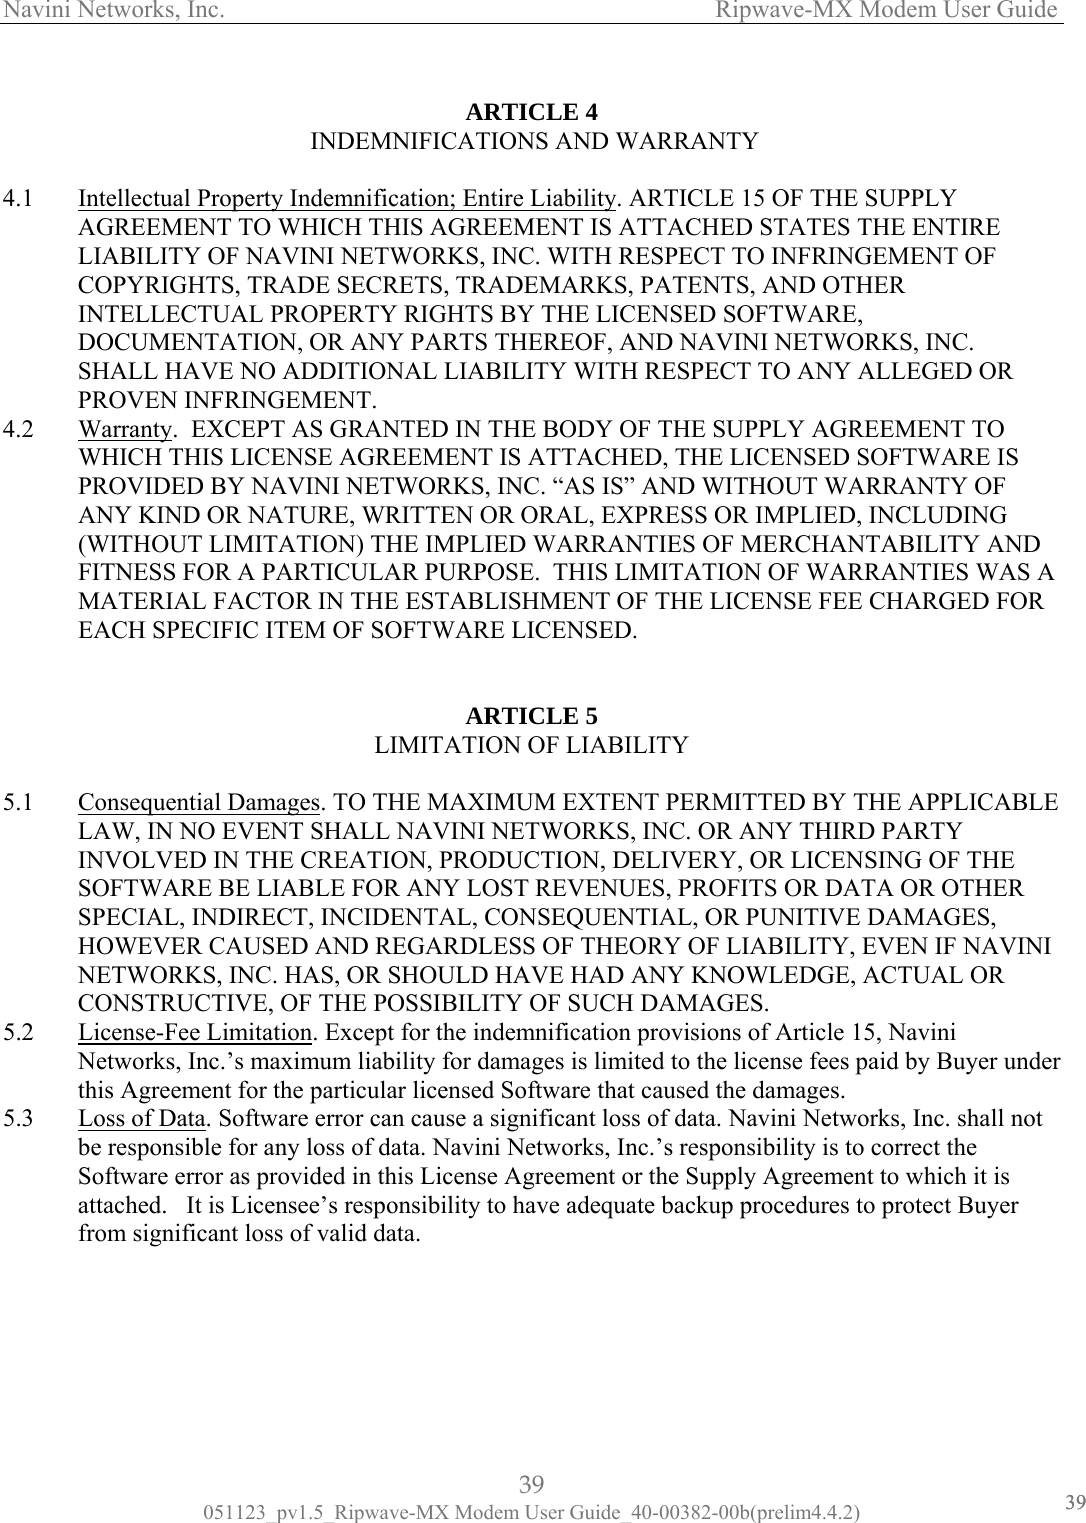 Navini Networks, Inc.                   Ripwave-MX Modem User Guide  ARTICLE 4 4.1  Intellectual Property Indemnifica INDEMNIFICATIONS AND WARRANTY   tion; Entire Liability. ARTICLE 15 OF THE SUPPLY AGREEMENT TO WHICH THIS AGREEMENT IS ATTACHED STATES THE ENTIRE LIABILITY OF NAVINI NETWORKS, I TH RESPECT TO INFRINGEMENT OF COPYRIGHTS, TRADE SECRETS, TRADEMARKS, PATENTS, AND OTHER INTELLECTUAL PROPERTY RIGHTS BY THE LICENSED SOFTWARE, DOCUMENTATION, OR ANY PARTS THEREOF, AND NAVINI NETWORKS, INC. SHALL HAVE NO ADDITION SPECT TO ANY ALLEGED OR PROVEN INFRINGEMENT. NC. WIAL LIABILITY WITH RE4.2  Warranty.  EXCEPT AS GRANTED IN THE BODY OF THE SUPPLY AGREEMENT TO WHICH THIS LICENSE AGREEMENT IS ATTACHED, THE LICENSED SOFTWARE IS PROVIDED BY NAVINI NETWORKS, INC. “AS IS” AND WITHOUT WARRANTY OF ANY KIND OR NATURE, WRITTEN OR ORAL, EXPRESS OR IMPLIED, INCLUDING (WITHOUT LIMITATION) THE IMP ANTIES OF MERCHANTABILITY AND FITNESS FOR A PARTICULAR PURPOSE.  THIS LIMITATION OF WARRANTIES WAS A  LIED WARRMATERIAL FACTOR IN THE ESTABLISHMENT OF THE LICENSE FEE CHARGED FOR EACH SPECIFIC ITEM OF SOFTWARE LICENSED.  ARTICLE 5 LIMITATION OF LIABILITY   5.1  Consequential Damages. TO THE MAXIMUM EXTENT PERMITTED BY THE APPLICABLELAW, IN NO EVENT SHALL NAVINI NETWORKS, INC. OR ANY THIRD PARTY INVOLVED IN THE CREATION, PRODUCTION, DELIVERY, OR LICENSING OF THE SOFTWARE BE LIABLE FOR ANY LOST REVENUES, PROFITS OR DATA OR OTHER SPECIAL, INDIRECT, INCIDENTAL, CONSEQUENTIAL, OR PUNITIVE DAMAGES, HOWEVER CAUSED AND REGARDLESS OF THEORY OF LIABILITY, EVEN IF NAVININETWORKS, INC. HAS, OR SHOULD HAVE HAD ANY KNOWLEDGE, ACTUAL OR CONSTRUCTIVE, OF THE POSSIBILITY OF SUCH DAMAGES.   5.2  License-Fee Limitation. Except for the indemnification provisions of Article 15, Navini Networks, Inc.’s maximum liability for damages is limited to the license fees paid by Buyer unthis Agreement for the particular licensed Software that caused the damages. der 5.3  Loss of Data. Software error can cause a significant loss of data. Navini Networks, Inc. shall not be responsible for any loss of data. Navini Networks, Inc.’s responsibility is to correct the Software error as provided in this License Agreement or the Supply Agreement to which it is attached.   It is Licensee’s responsibility to have adequate backup procedures to protect Buyer from significant loss of valid data. 39 051123_pv1.5_Ripwave-MX Modem User Guide_40-00382-00b(prelim4.4.2) 3939